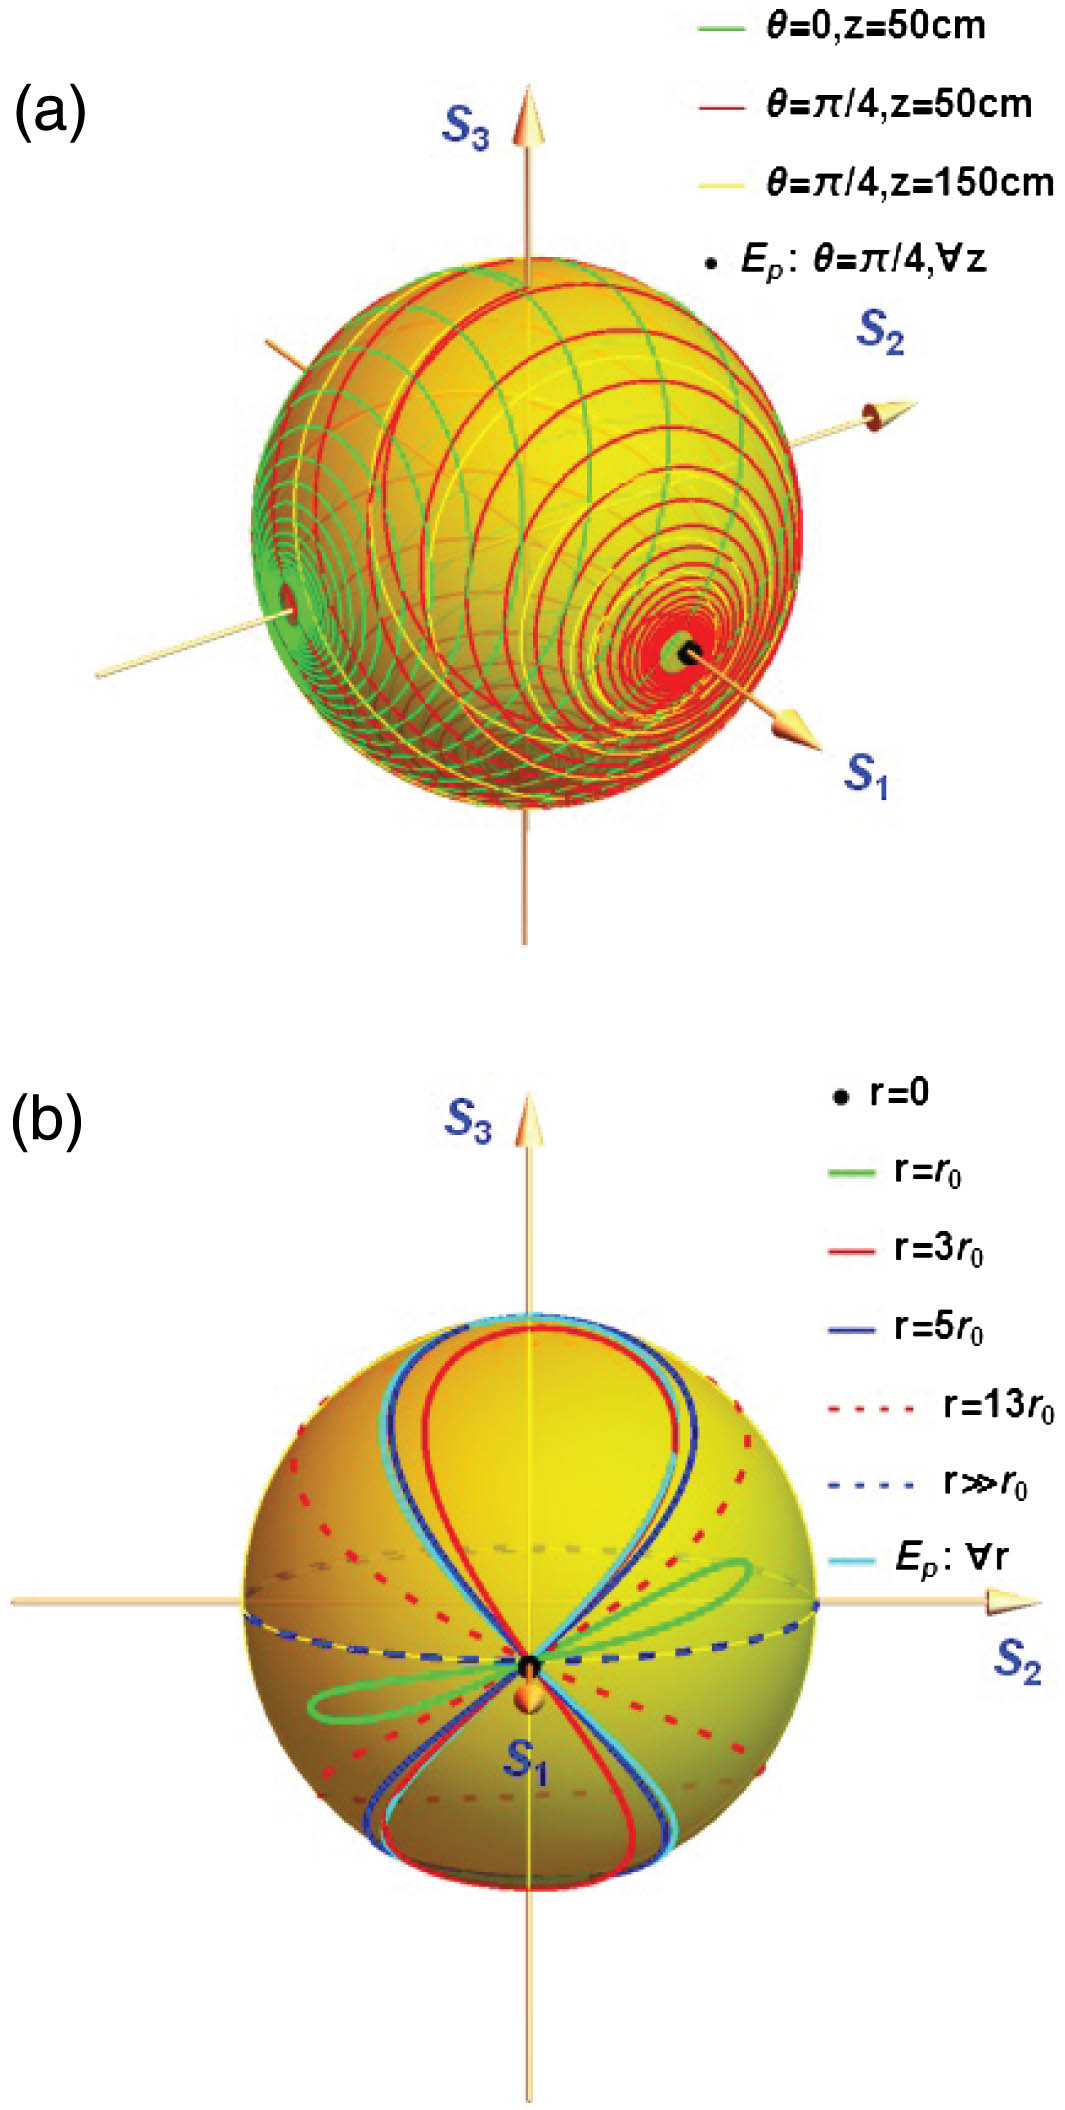 Polarization evolution on the Poincaré sphere. (a) For the vector vortex beam in Fig. 1(j), the polarization states along a radial direction (from r=0 to ∞ for a given θ) evolve from the north pole to the south pole. For the vector field in Fig. 1(i), the states in a radial direction correspond to a single point that does not change with propagation. (b) For the VB in Fig. 1(n), the polarization states on circles with different radii around the beam center evolve along different 8-shaped curves. Here, r0=0.3 mm is the radius of the first circle in Fig. 1. For the vector field in Fig. 1(m), the states on all circles evolve along the same 8-shaped curve.